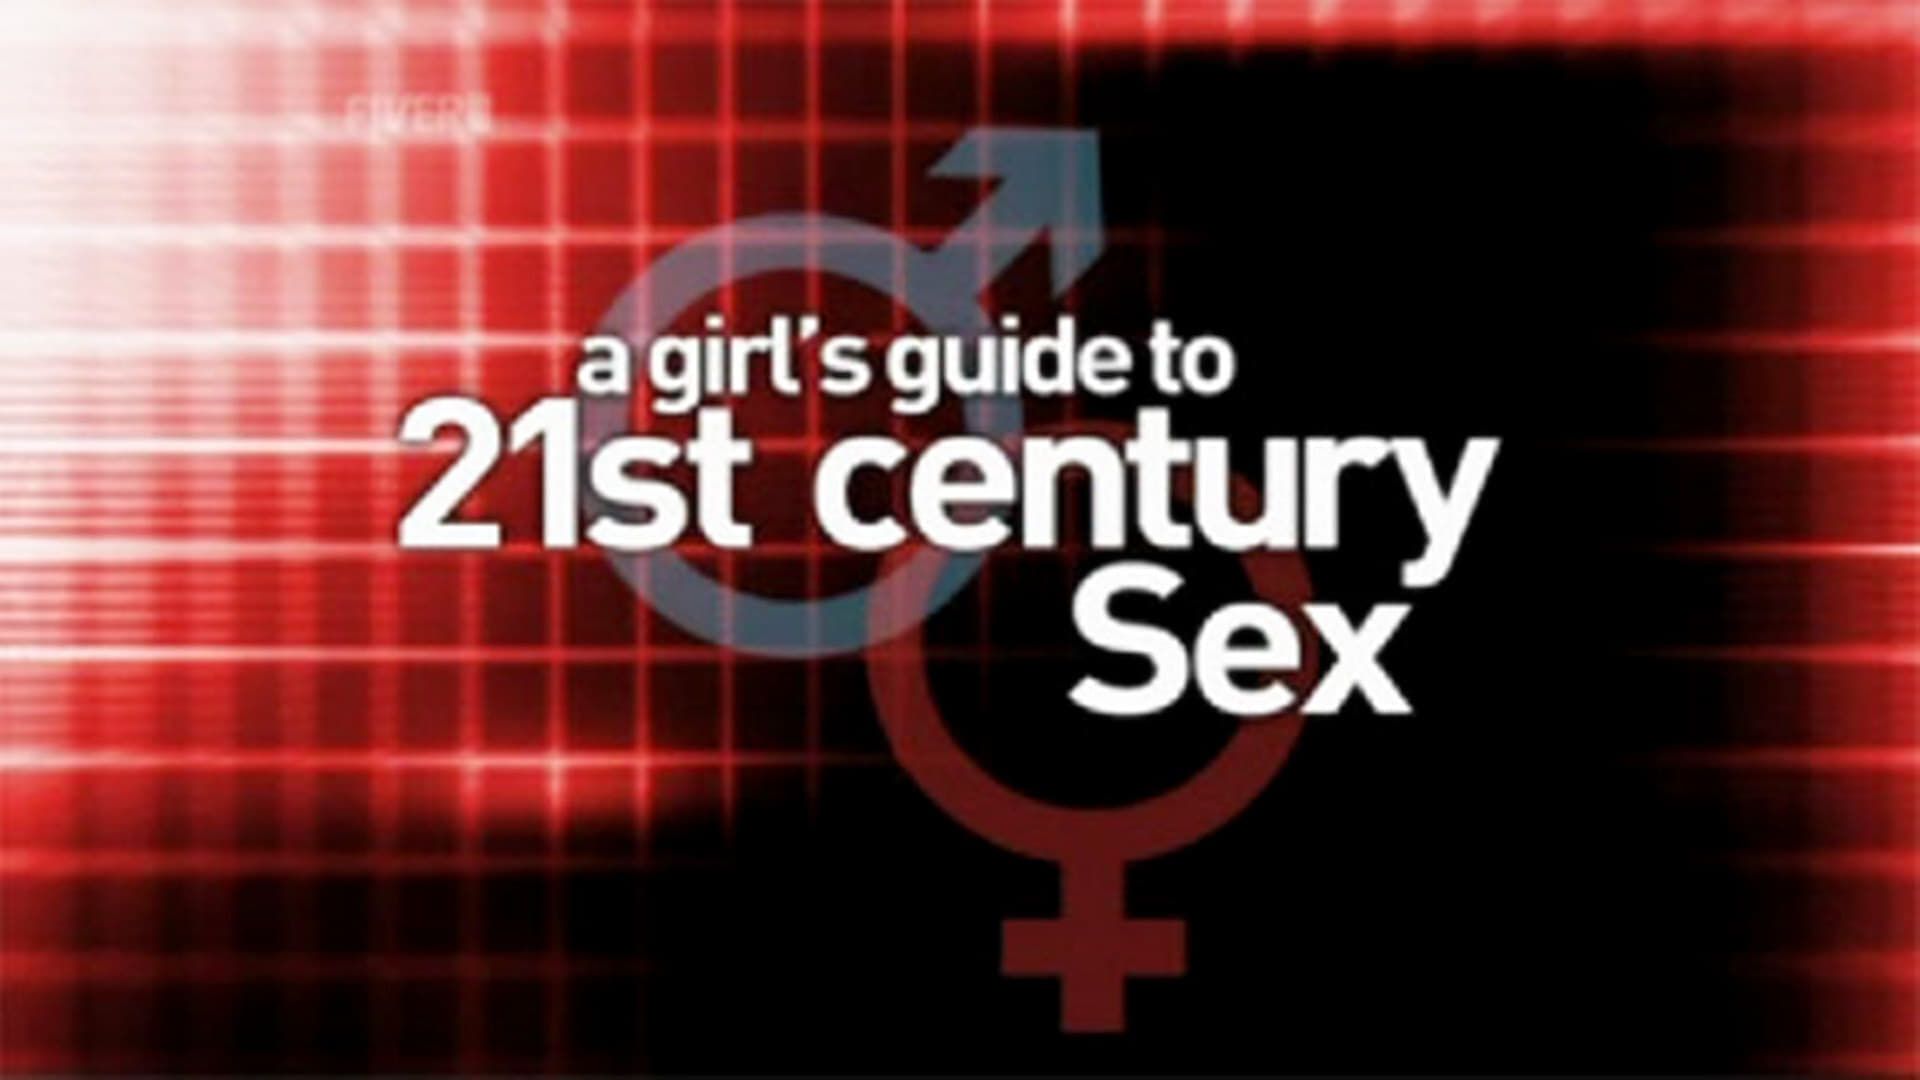 A Girl's Guide to 21st Century Sex background